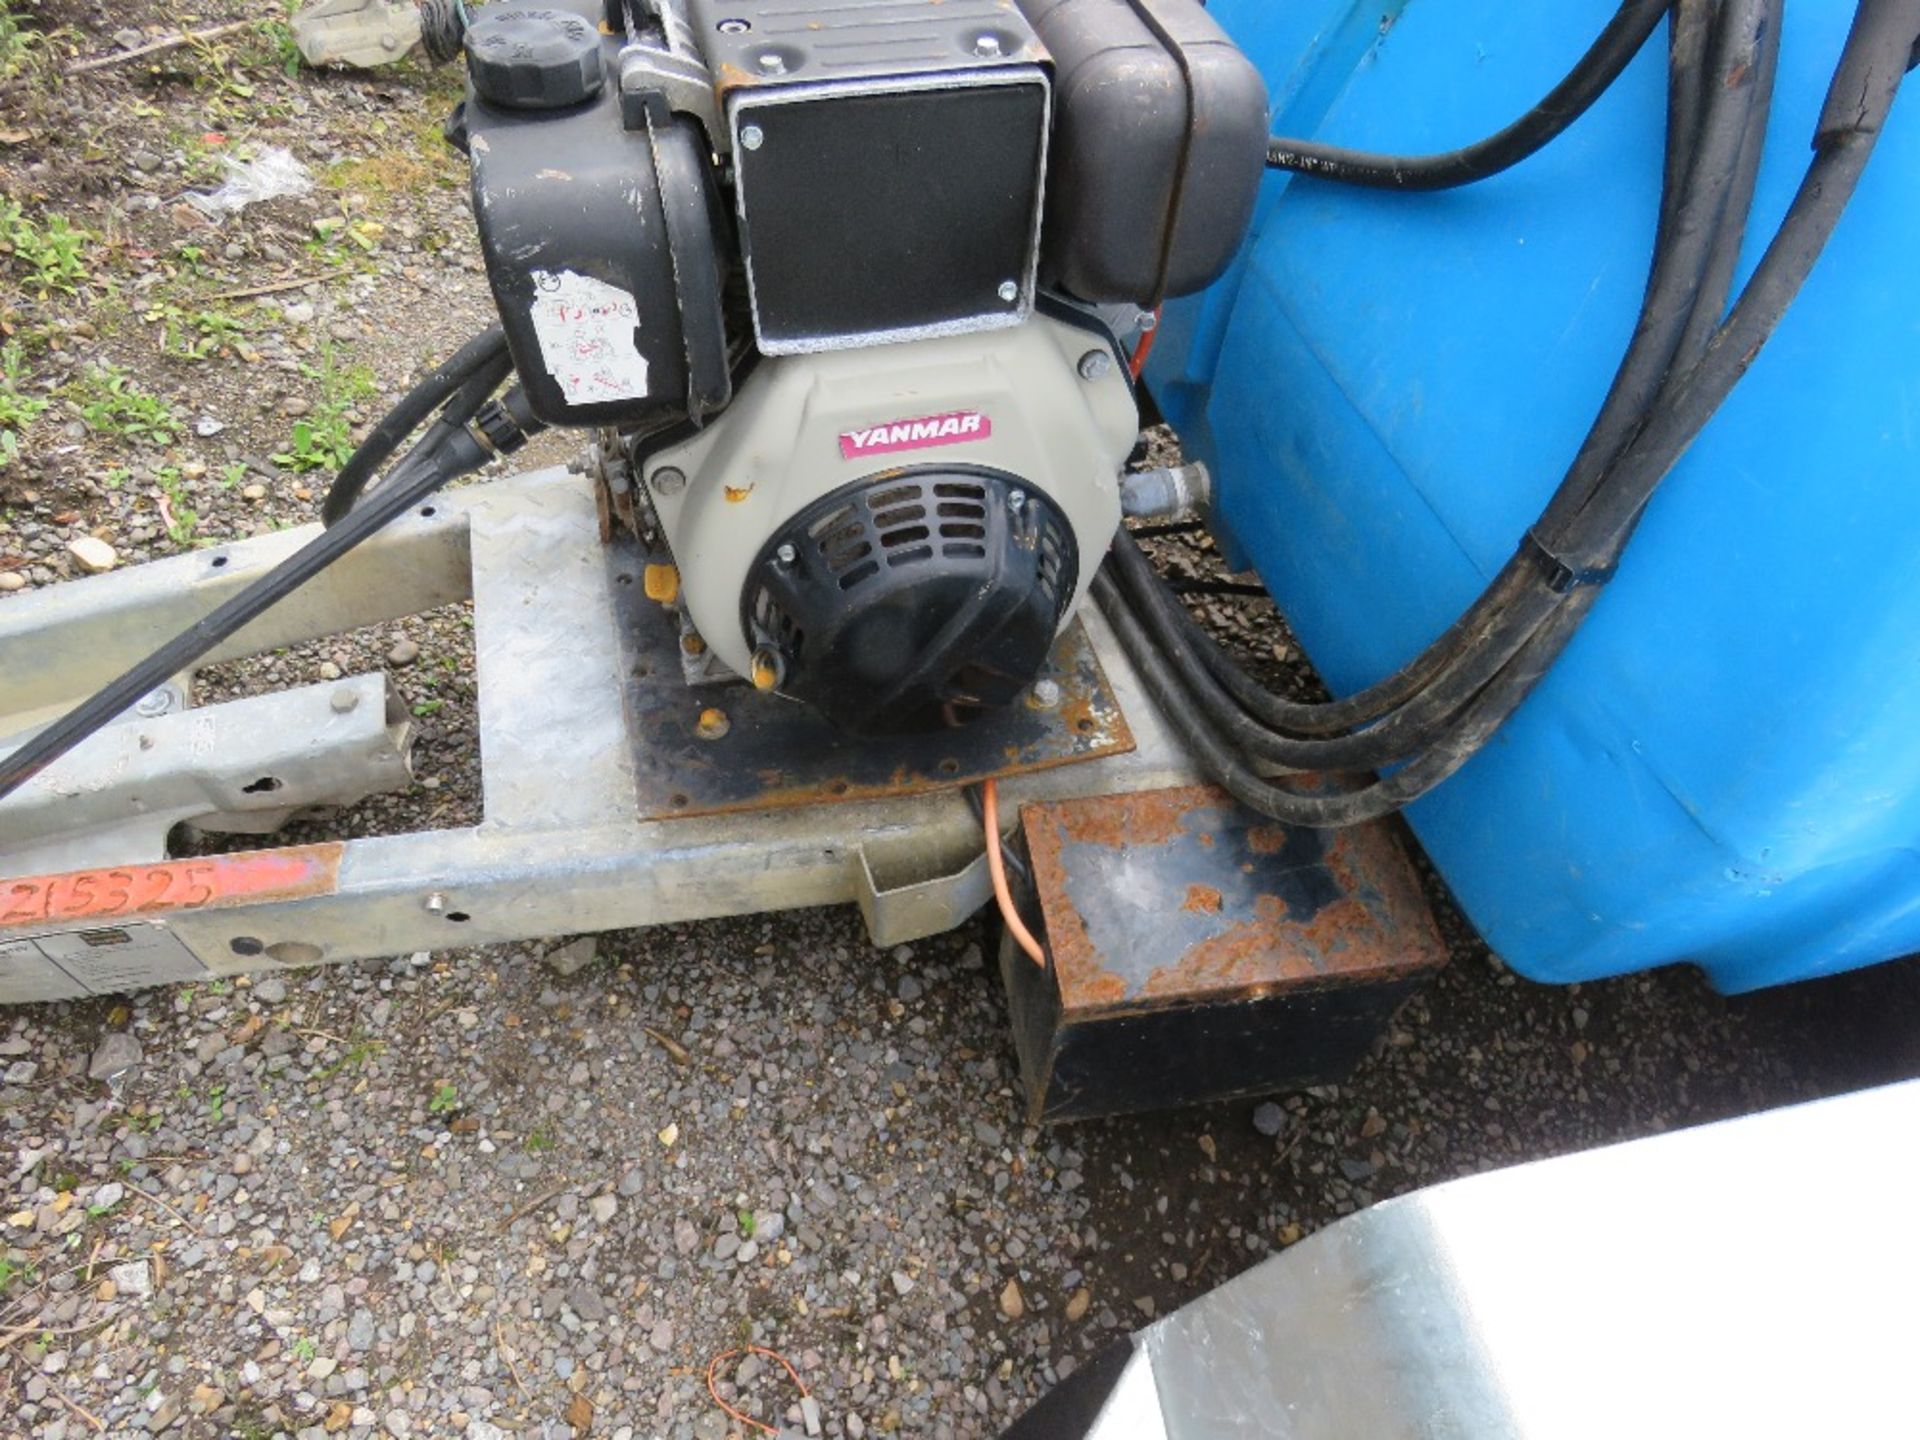 MAINWAY TOWED WASHER BOWSER WITH YANMAR ENGINED PUMP. WHEN INSPECTED NO POWER TO STARTER THEREFORE S - Image 3 of 6